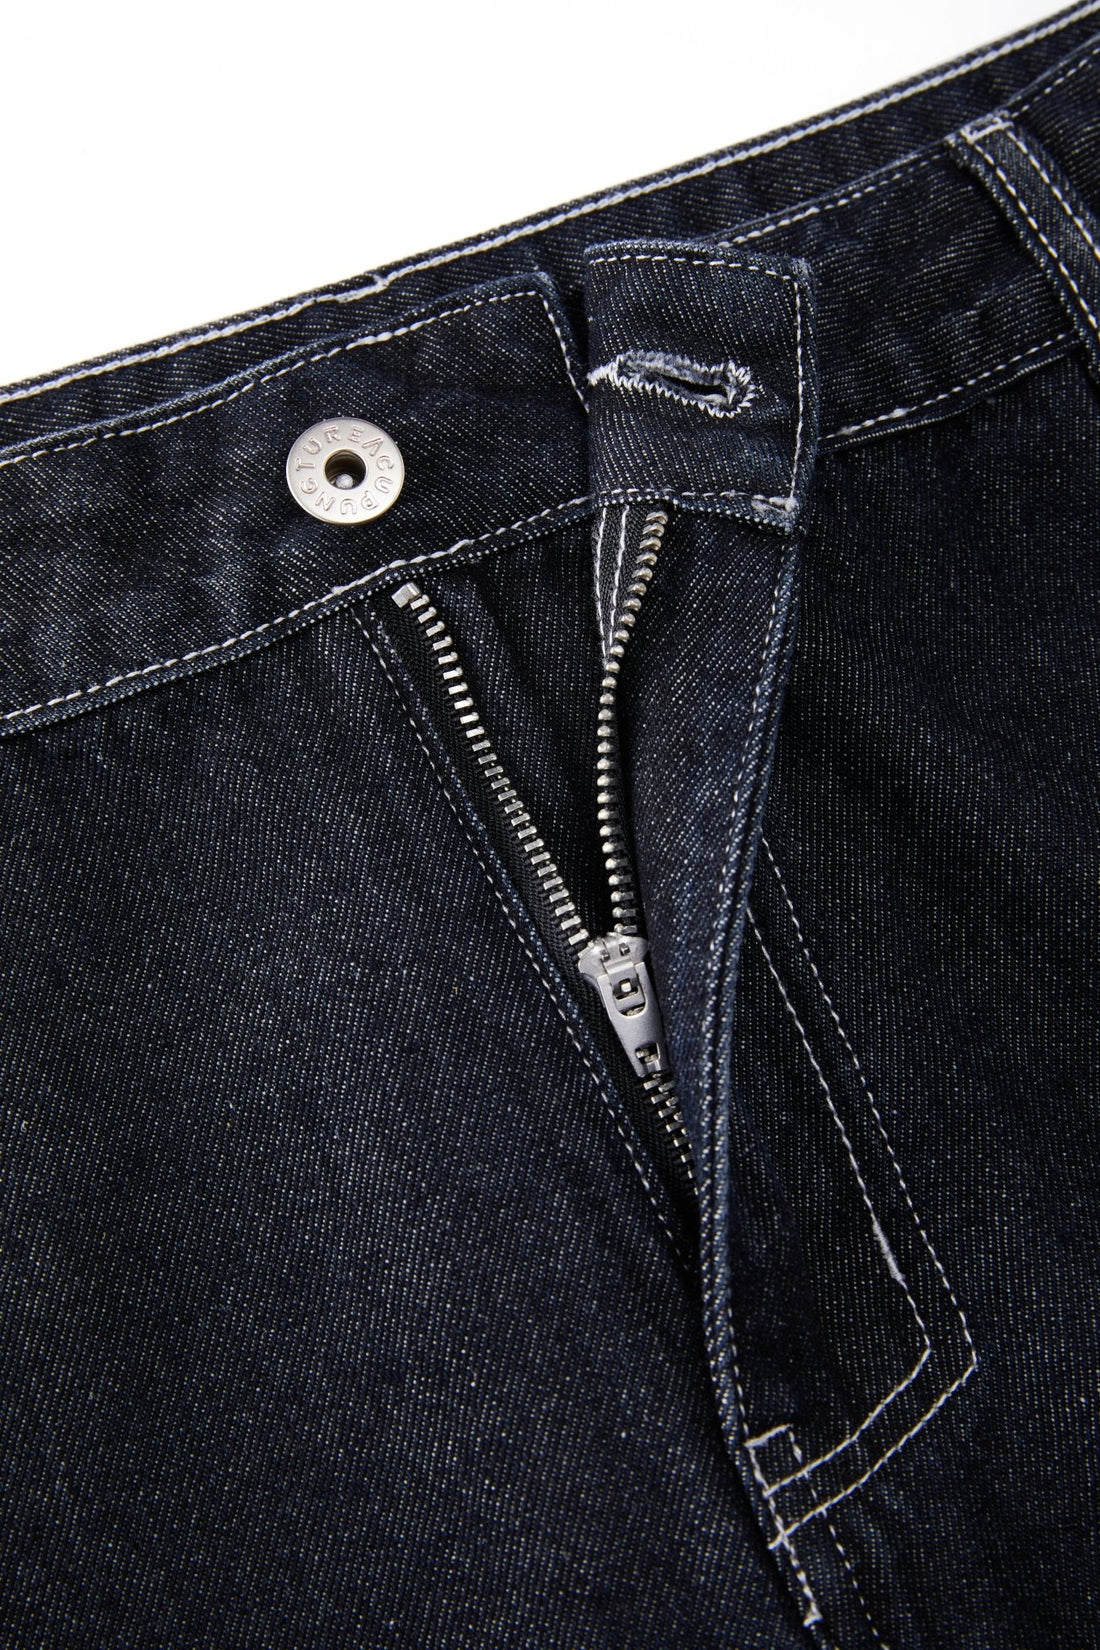 LINED JEANS BLACK Acupuncture